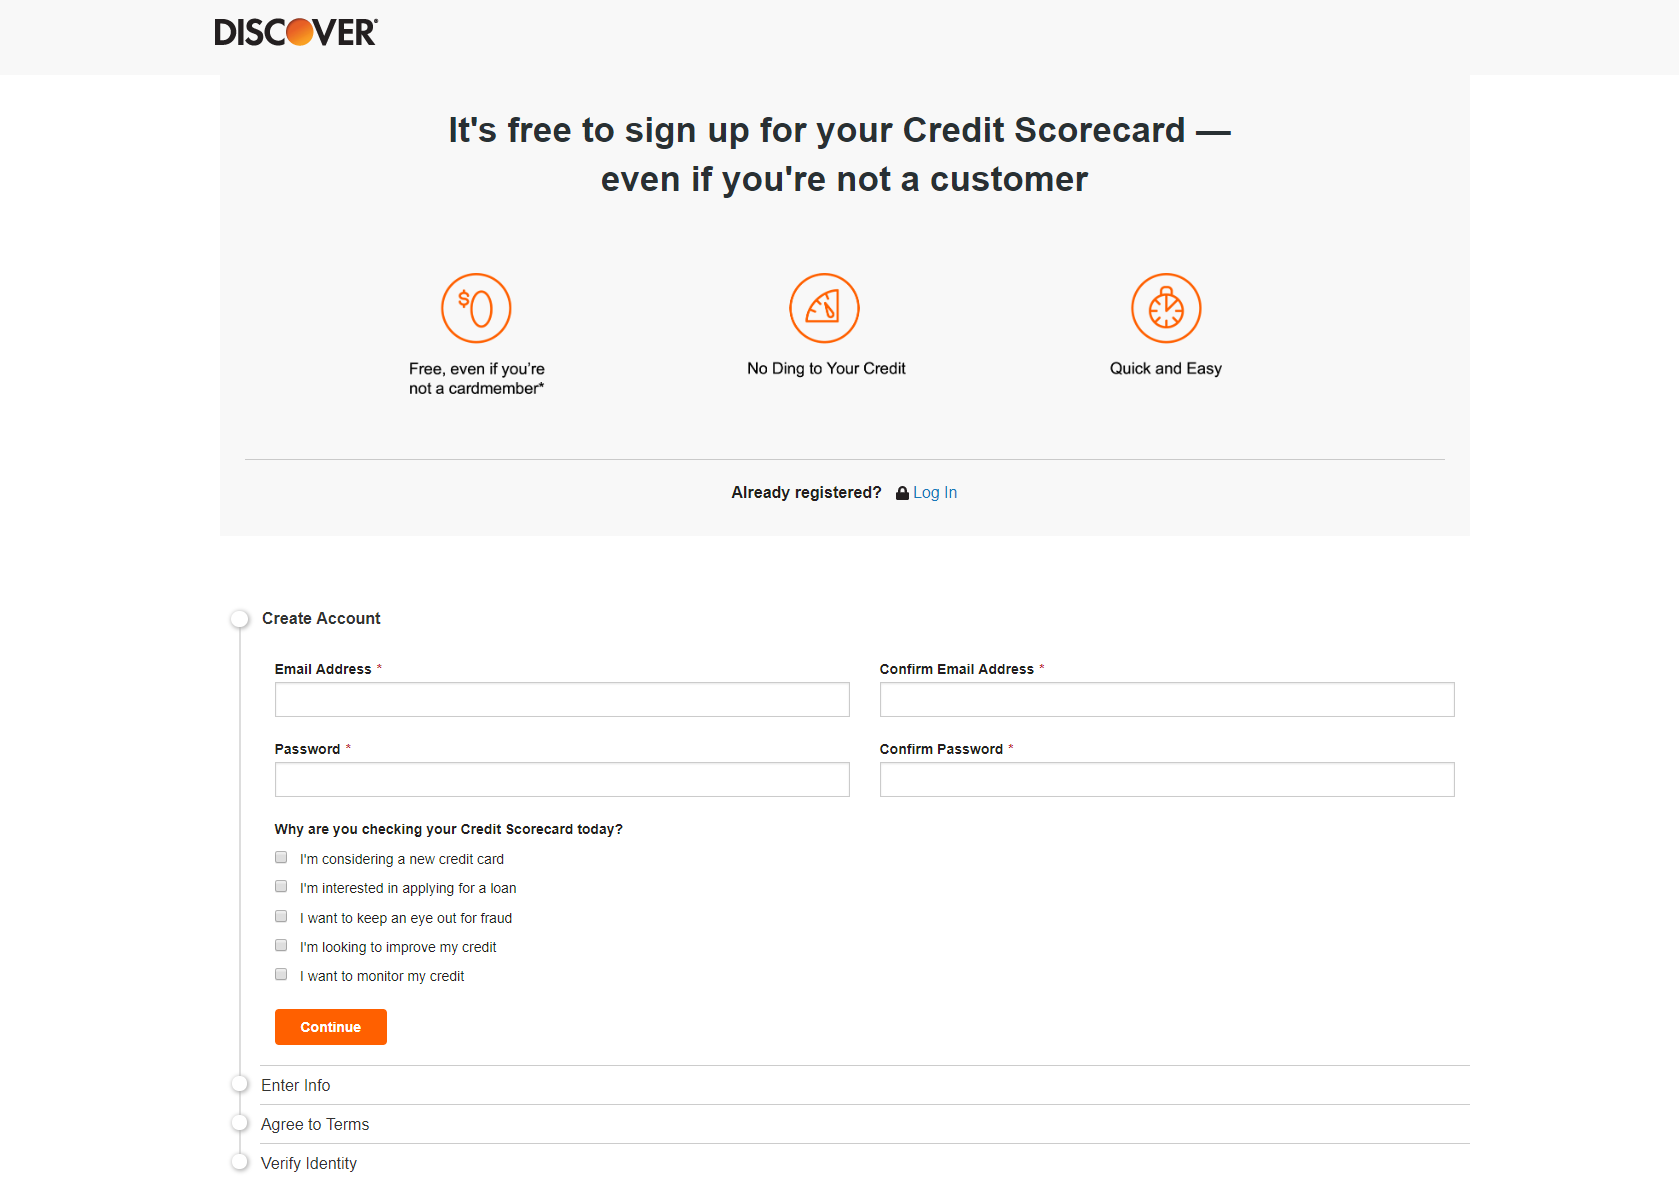 Discovers Credit Scorecard can help you monitor your credit ...